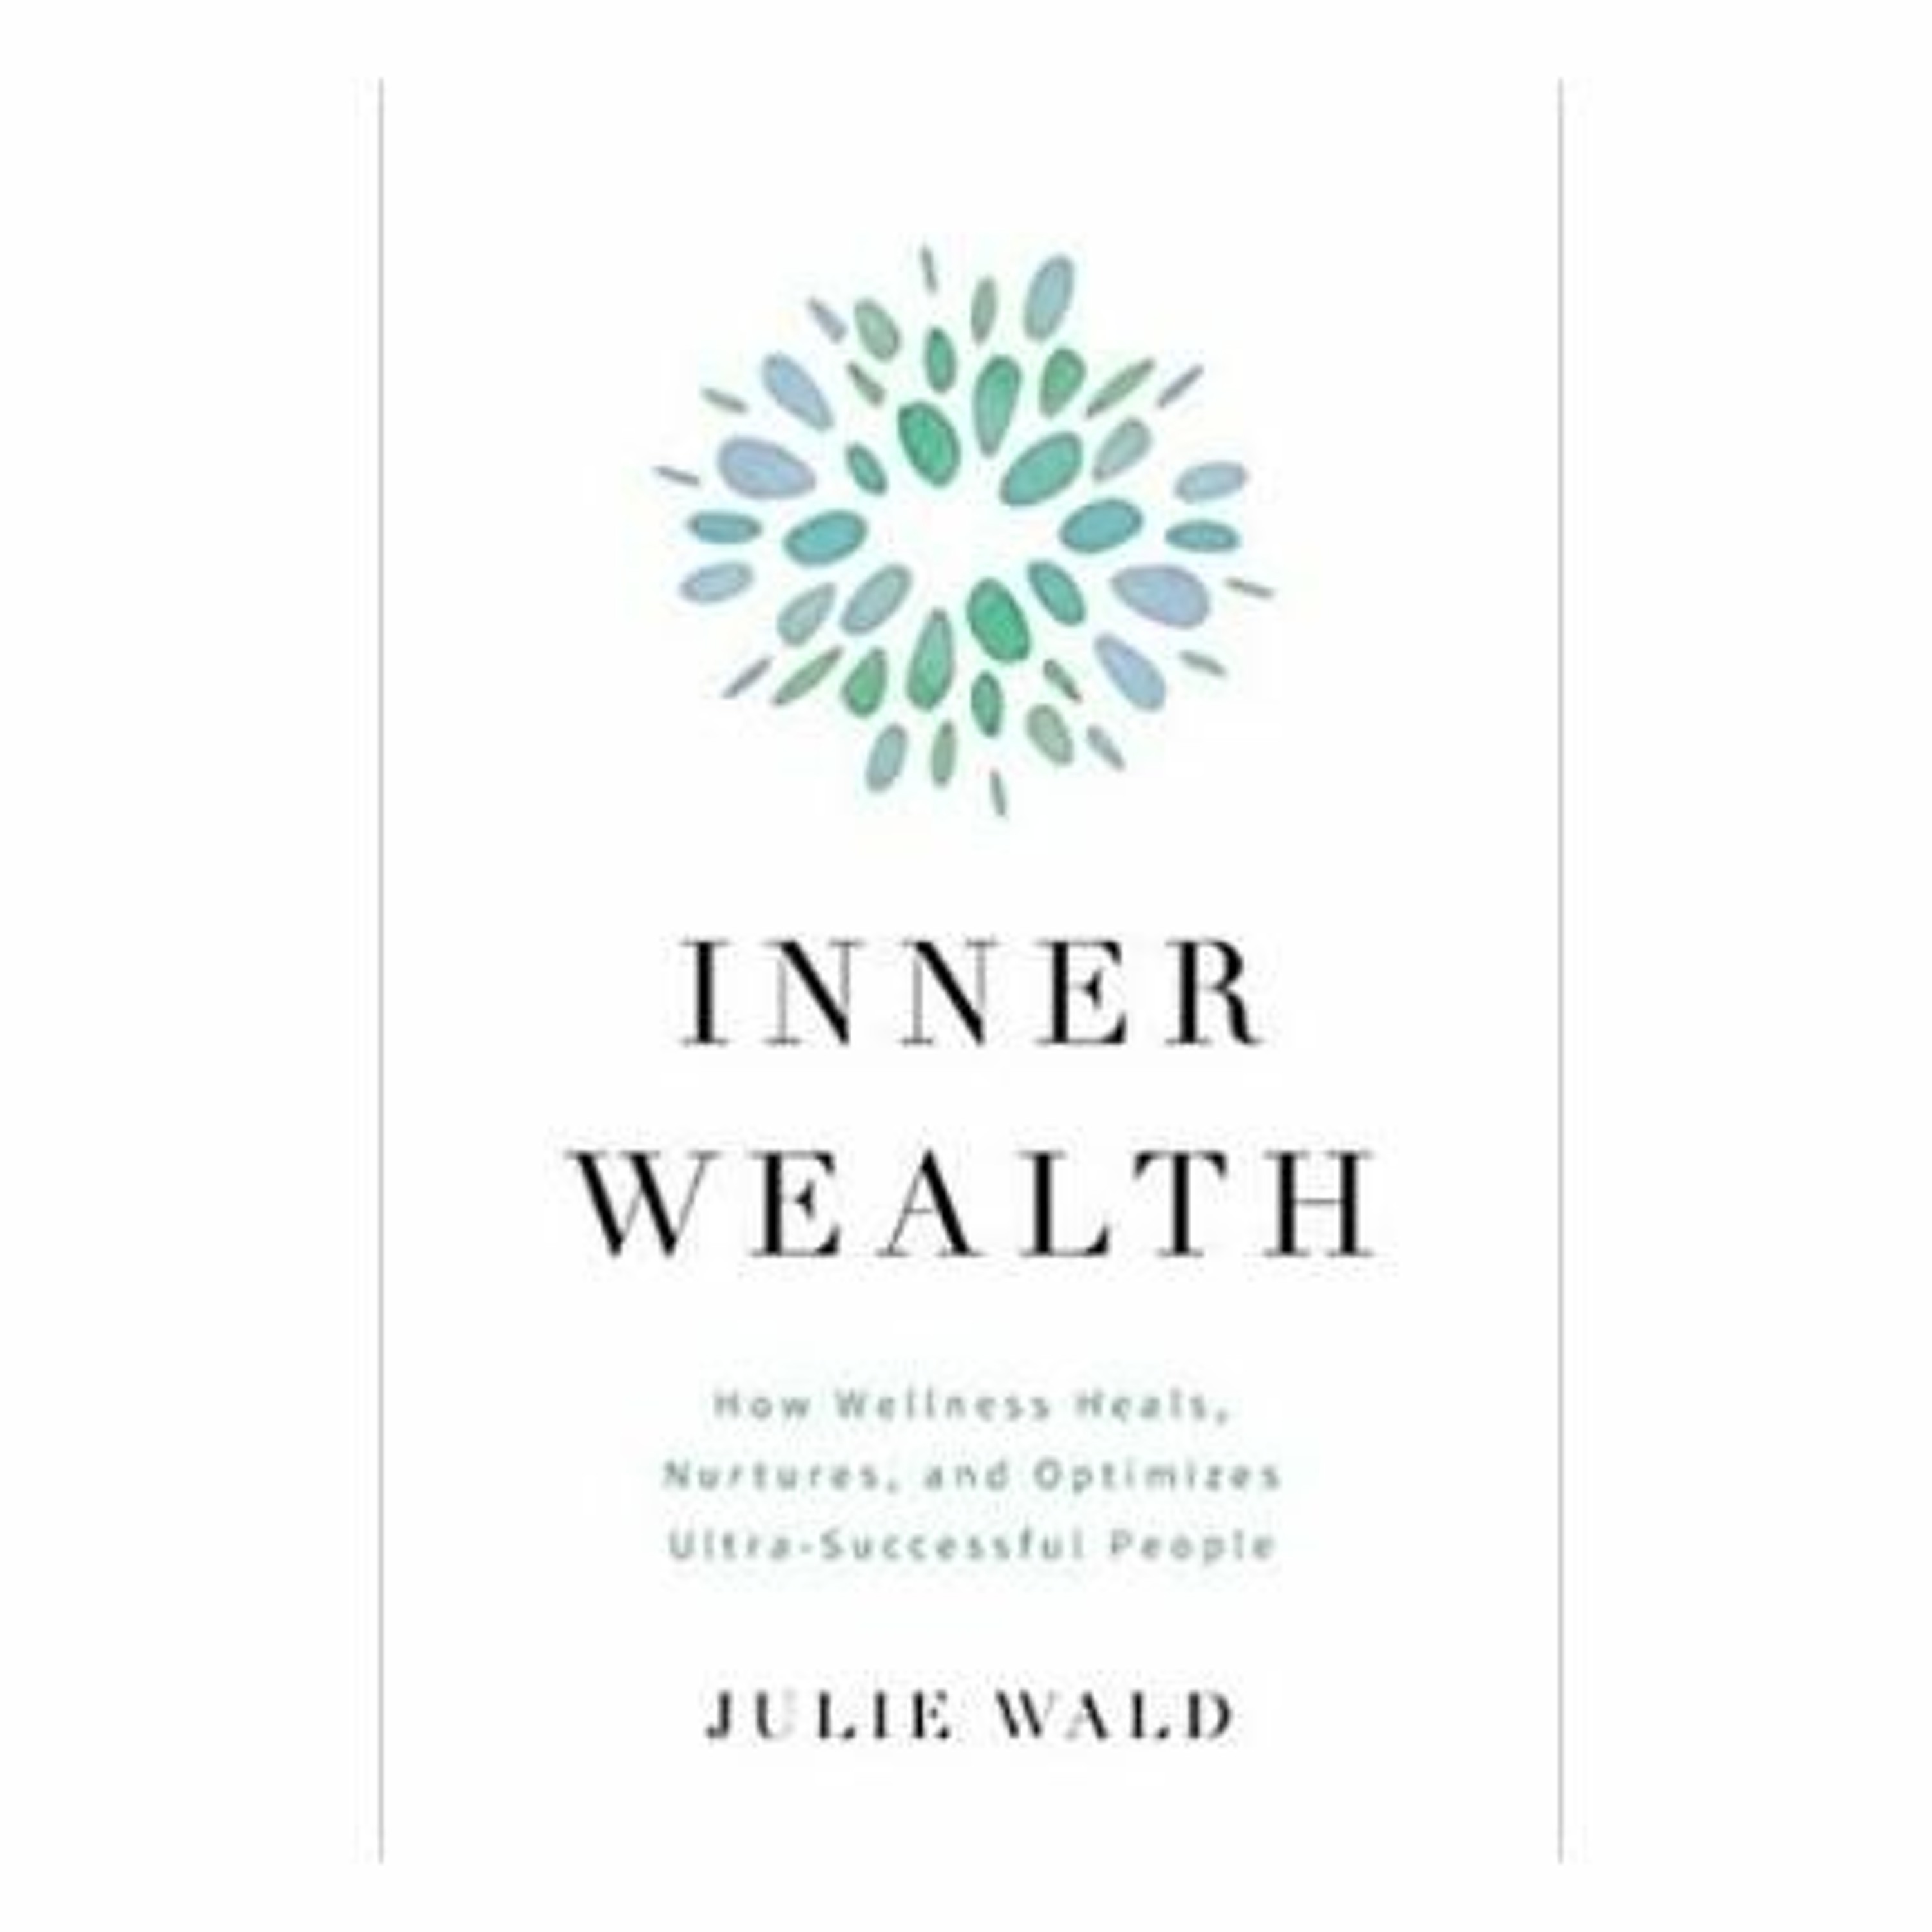 Podcast 930: Inner Wealth with Julie Wald